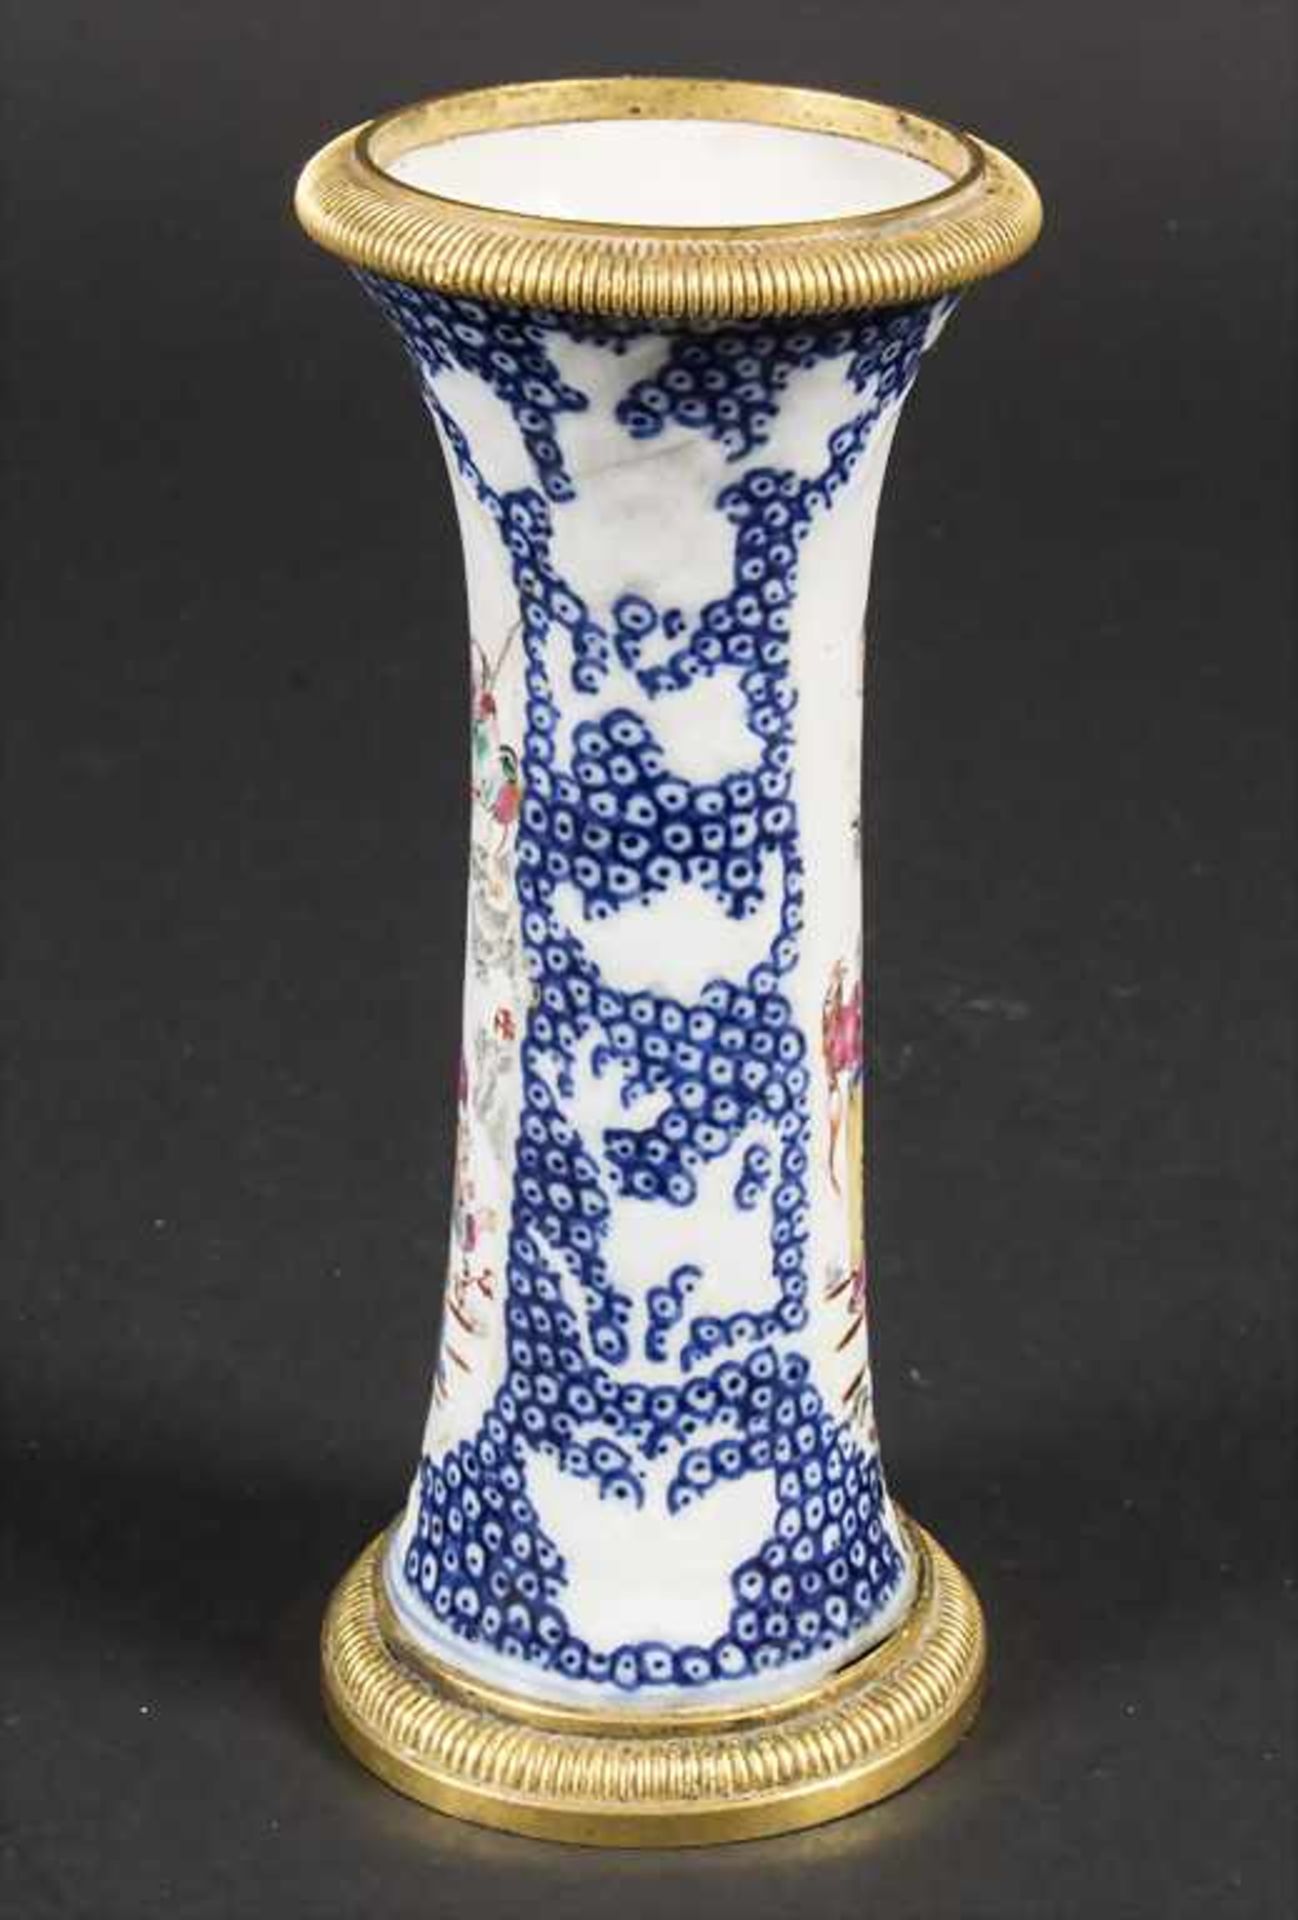 Ziervase / A decorative porcelain vase, China, Qing Dynastie (1644-1911), 18. Jh.Mater - Image 4 of 9